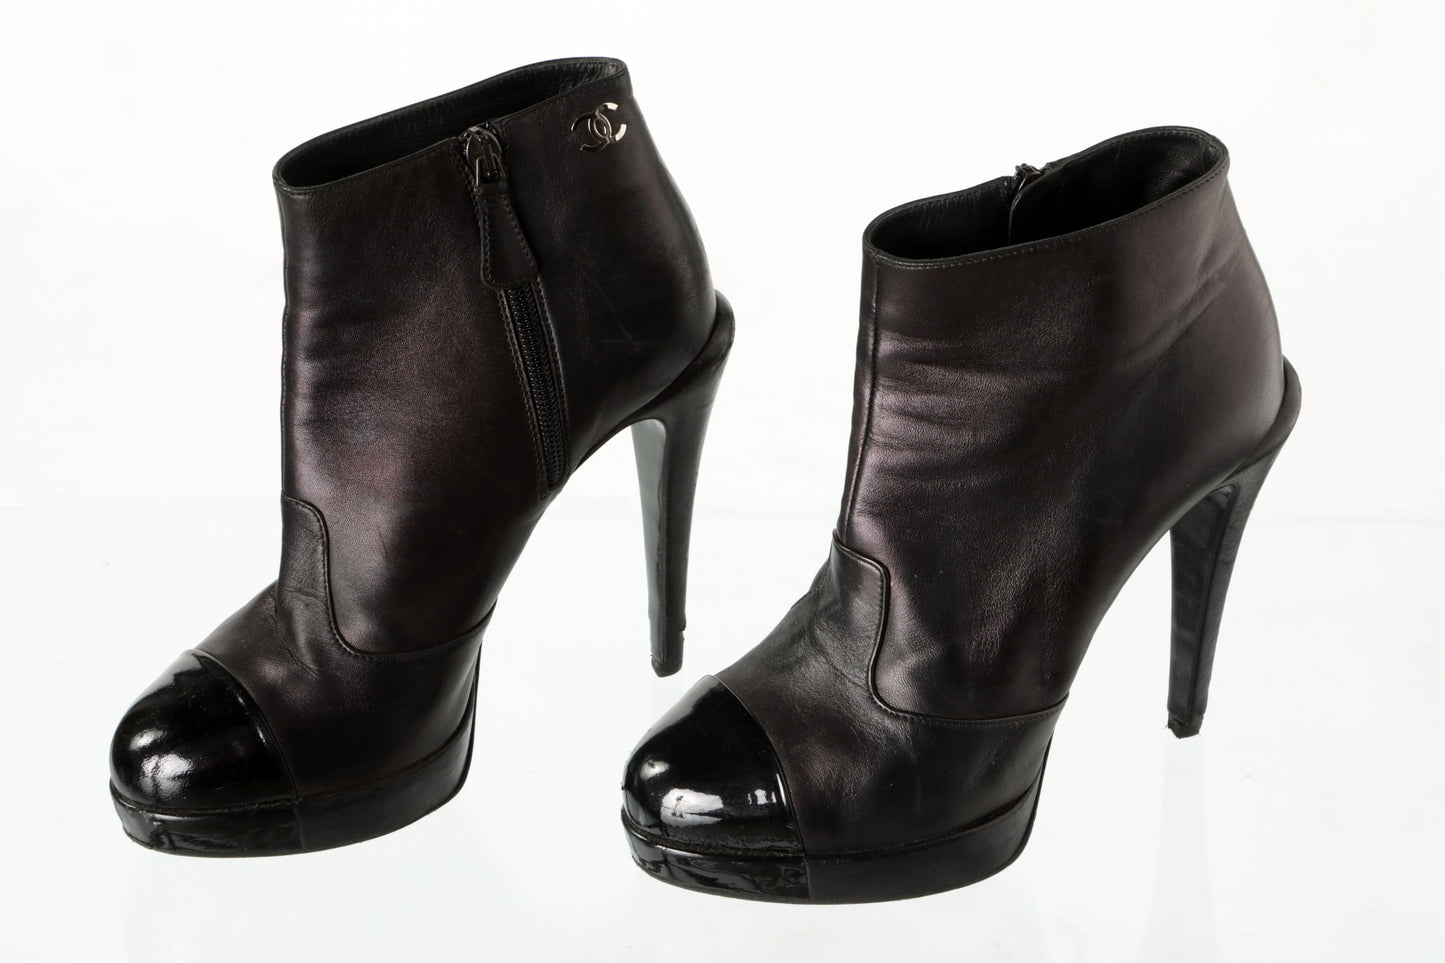 Chanel ankle boot in black leather